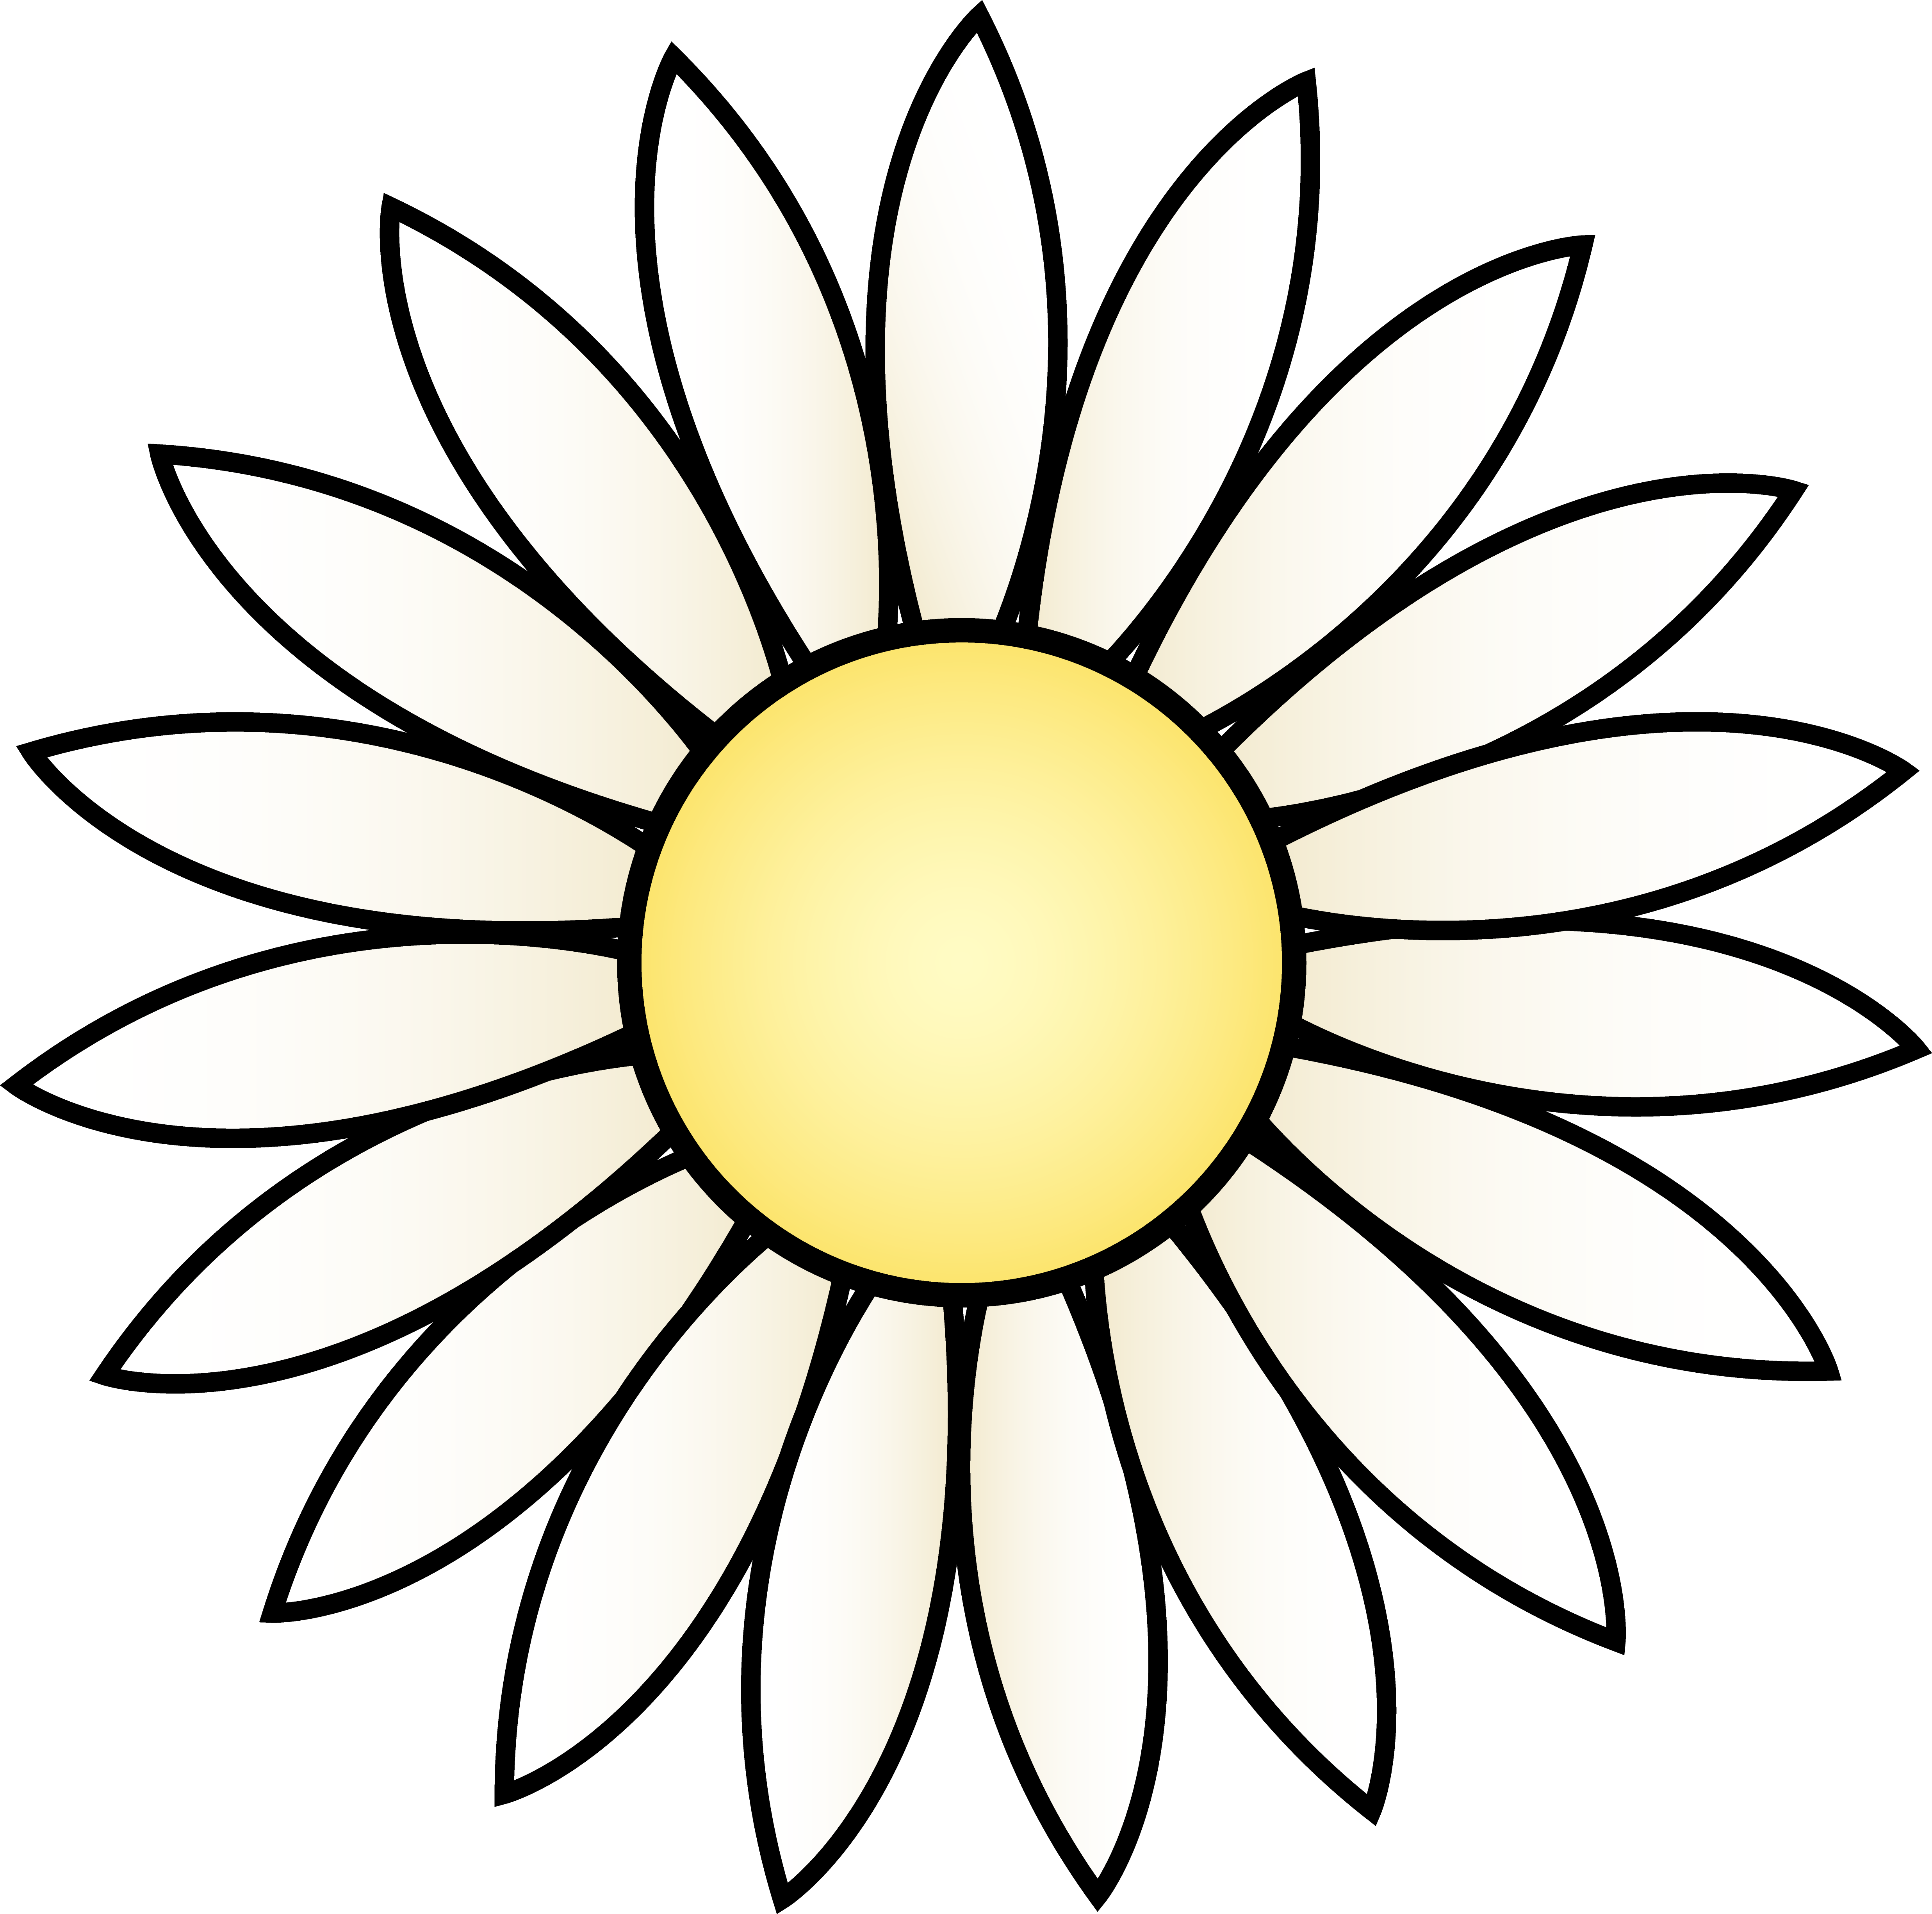 Flower drawing template at. Daisy clipart nature transparent